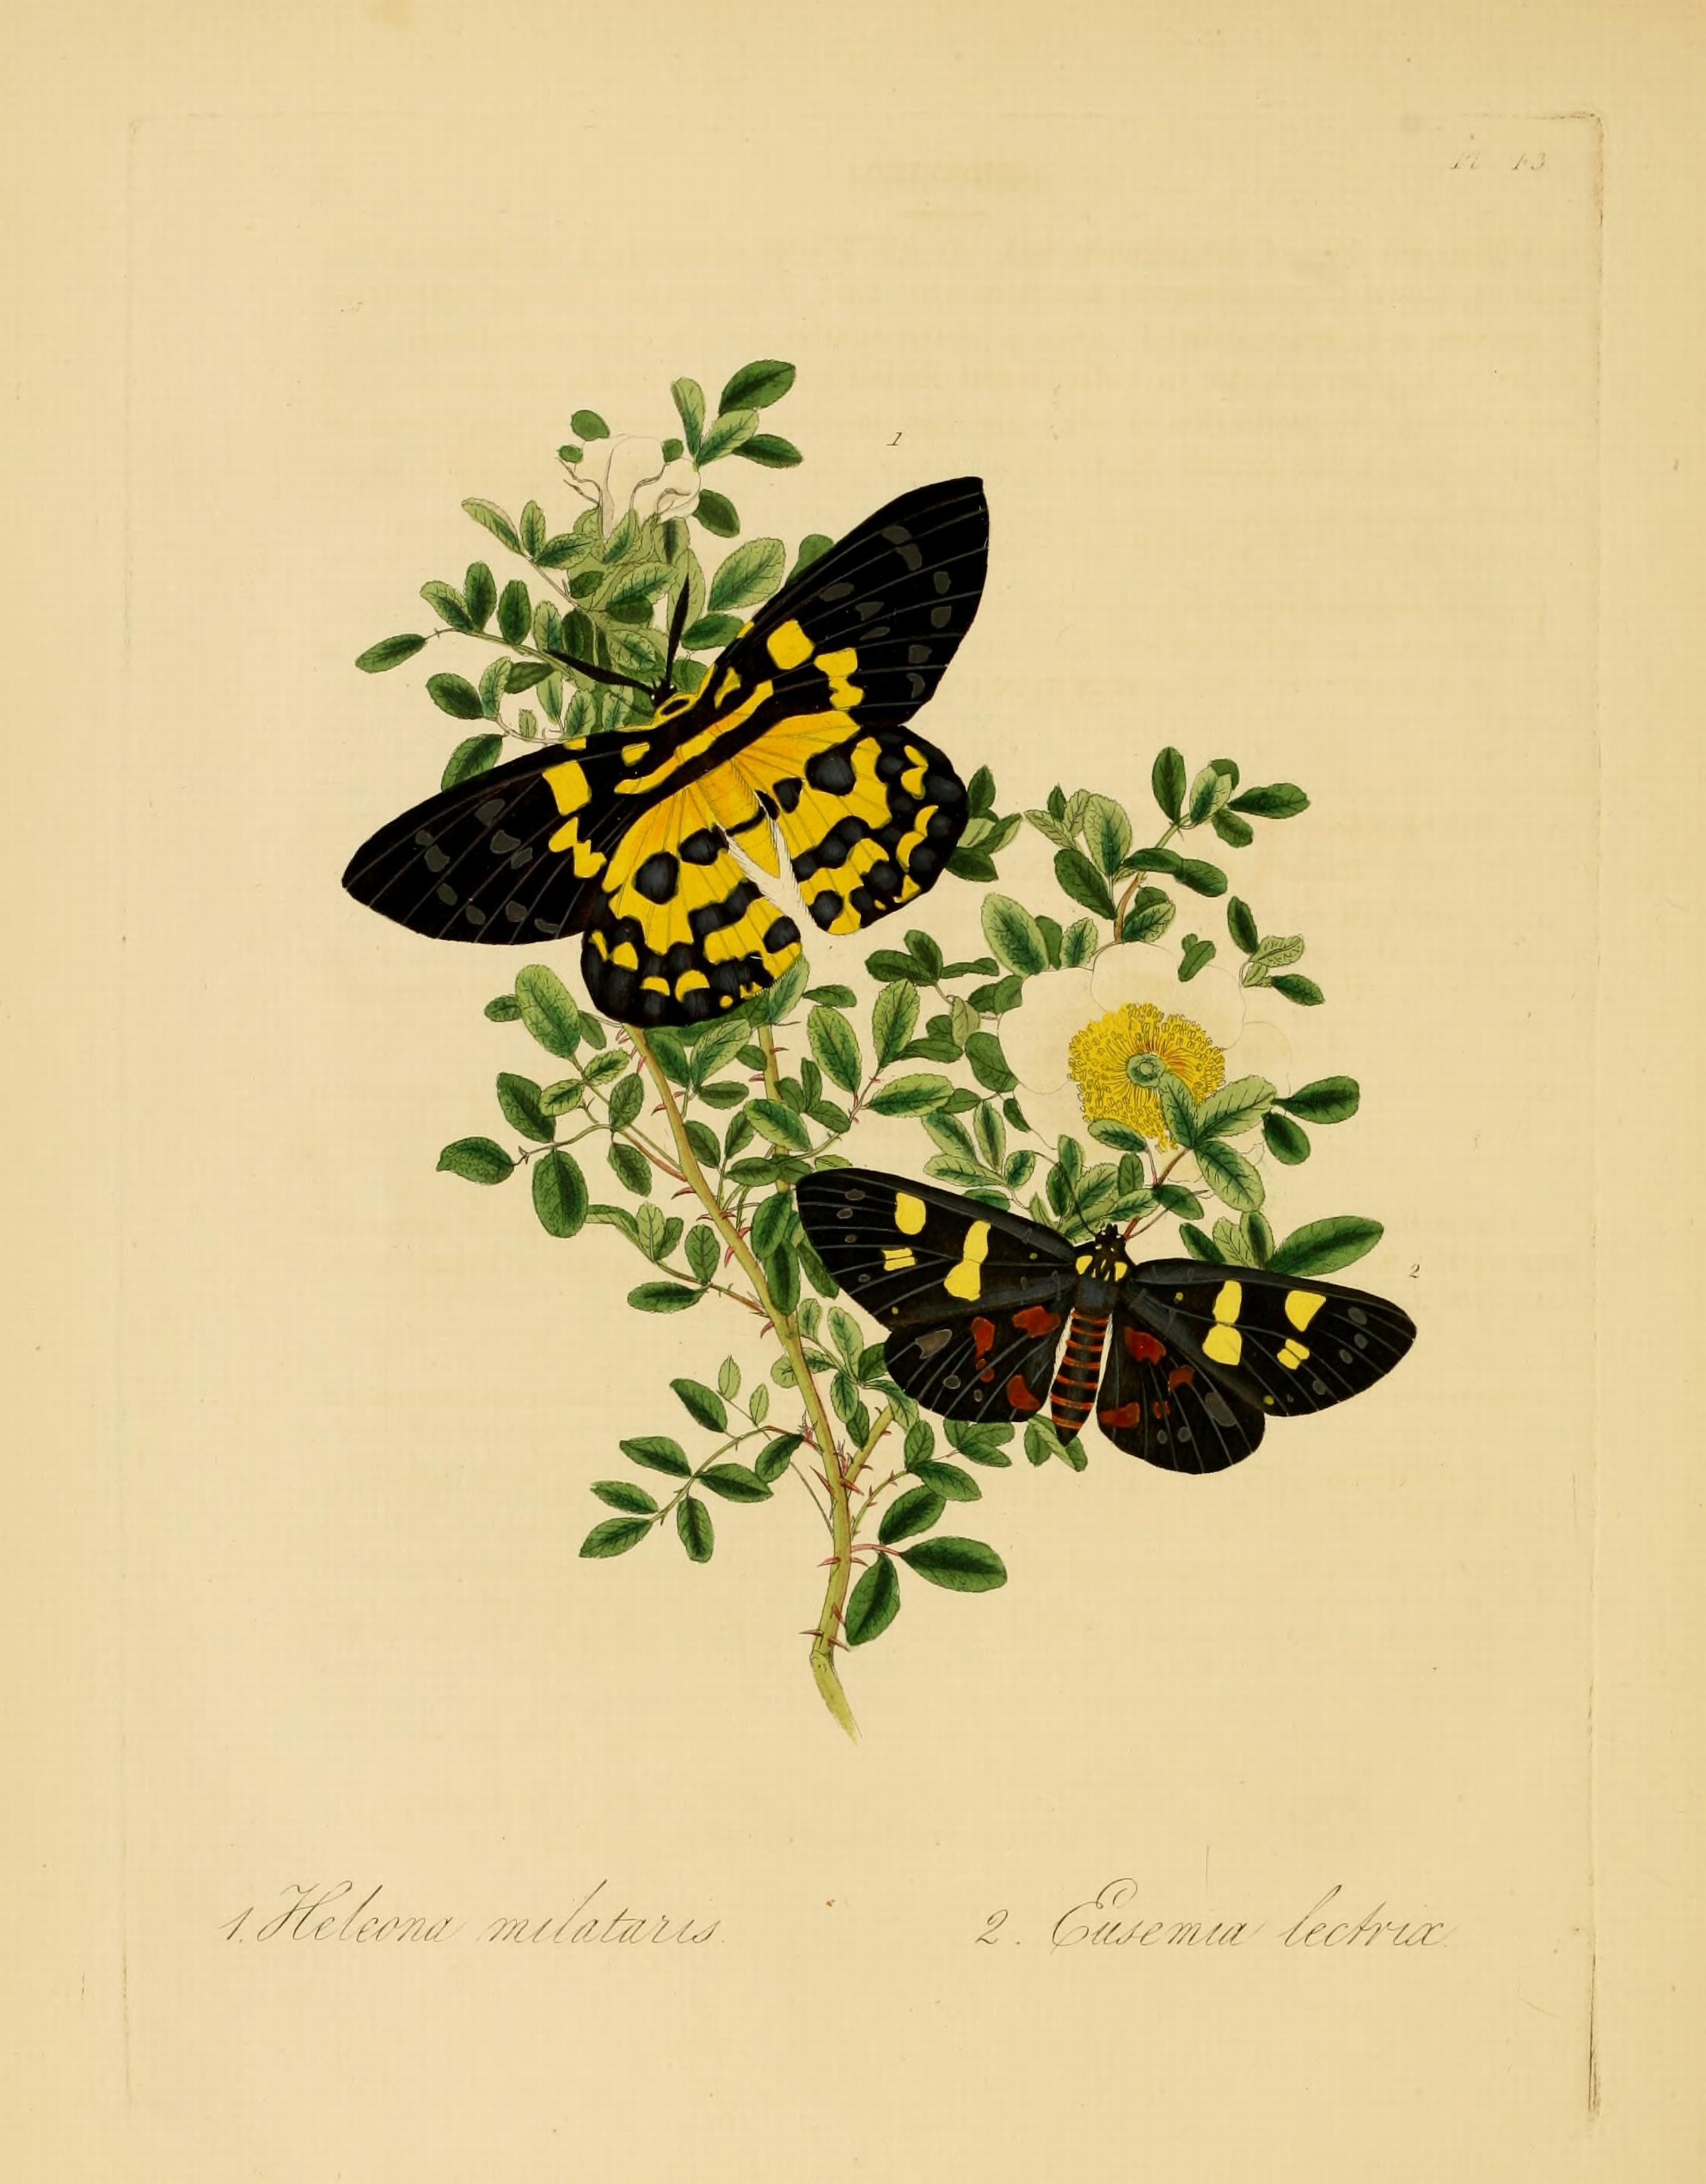 Donovan - Insects of China, 1838 - pl 43